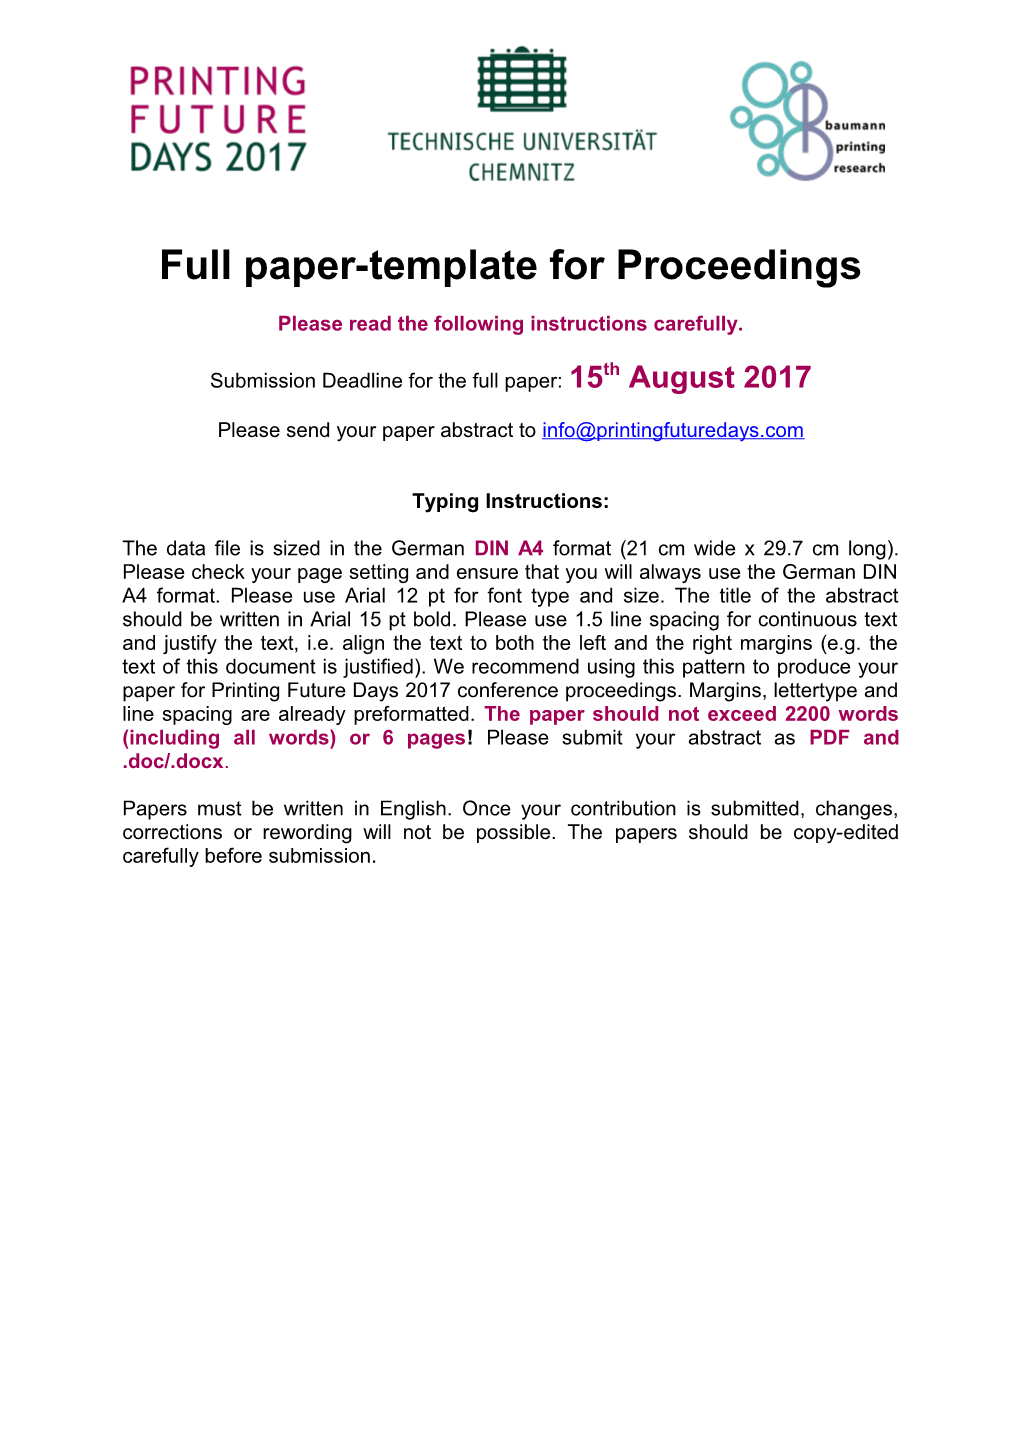 Full Paper-Template for Proceedings